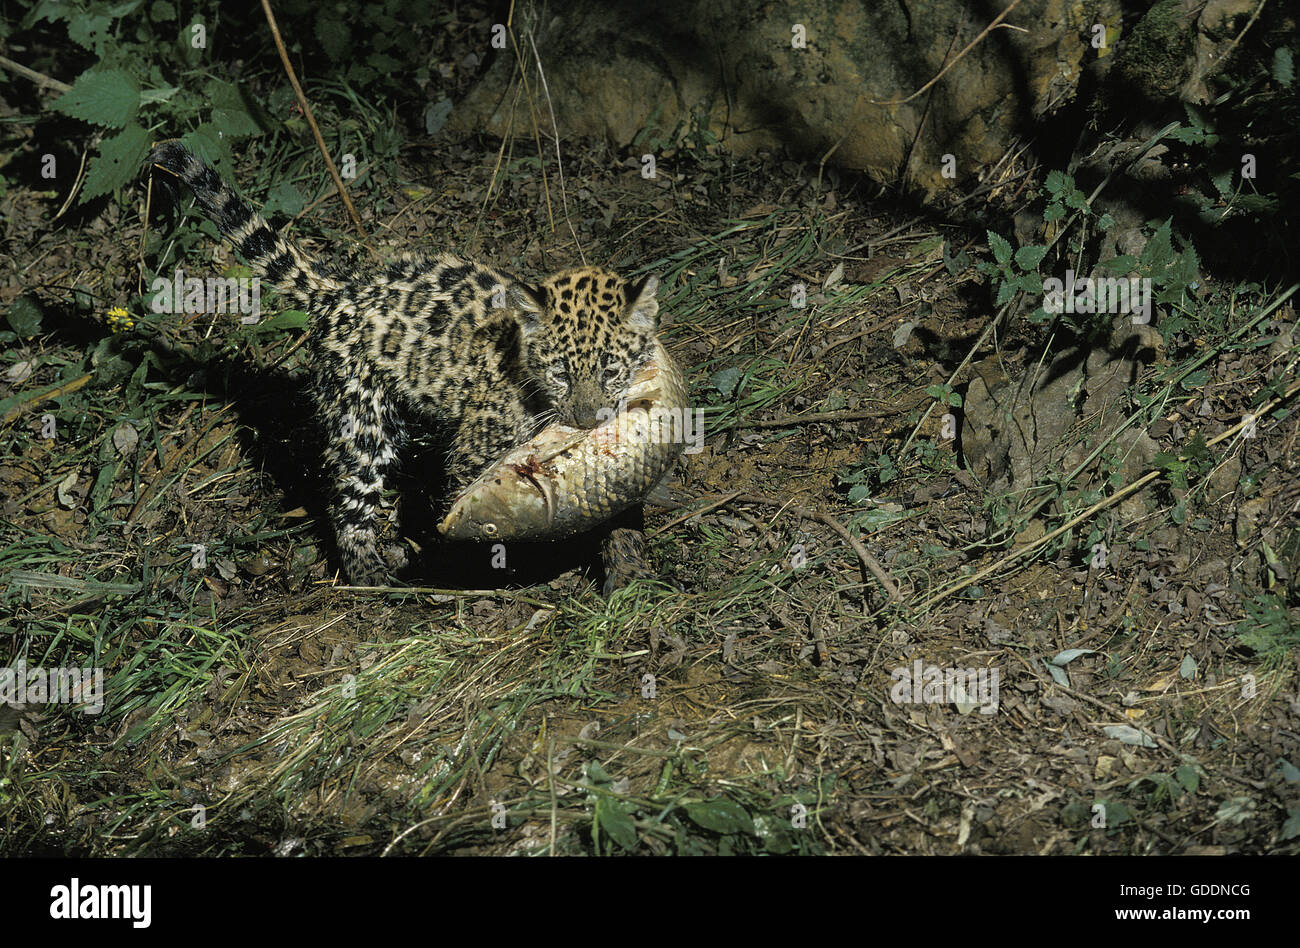 Jaguar, panthera onca, Cub carrying Fish in its Mouth Stock Photo